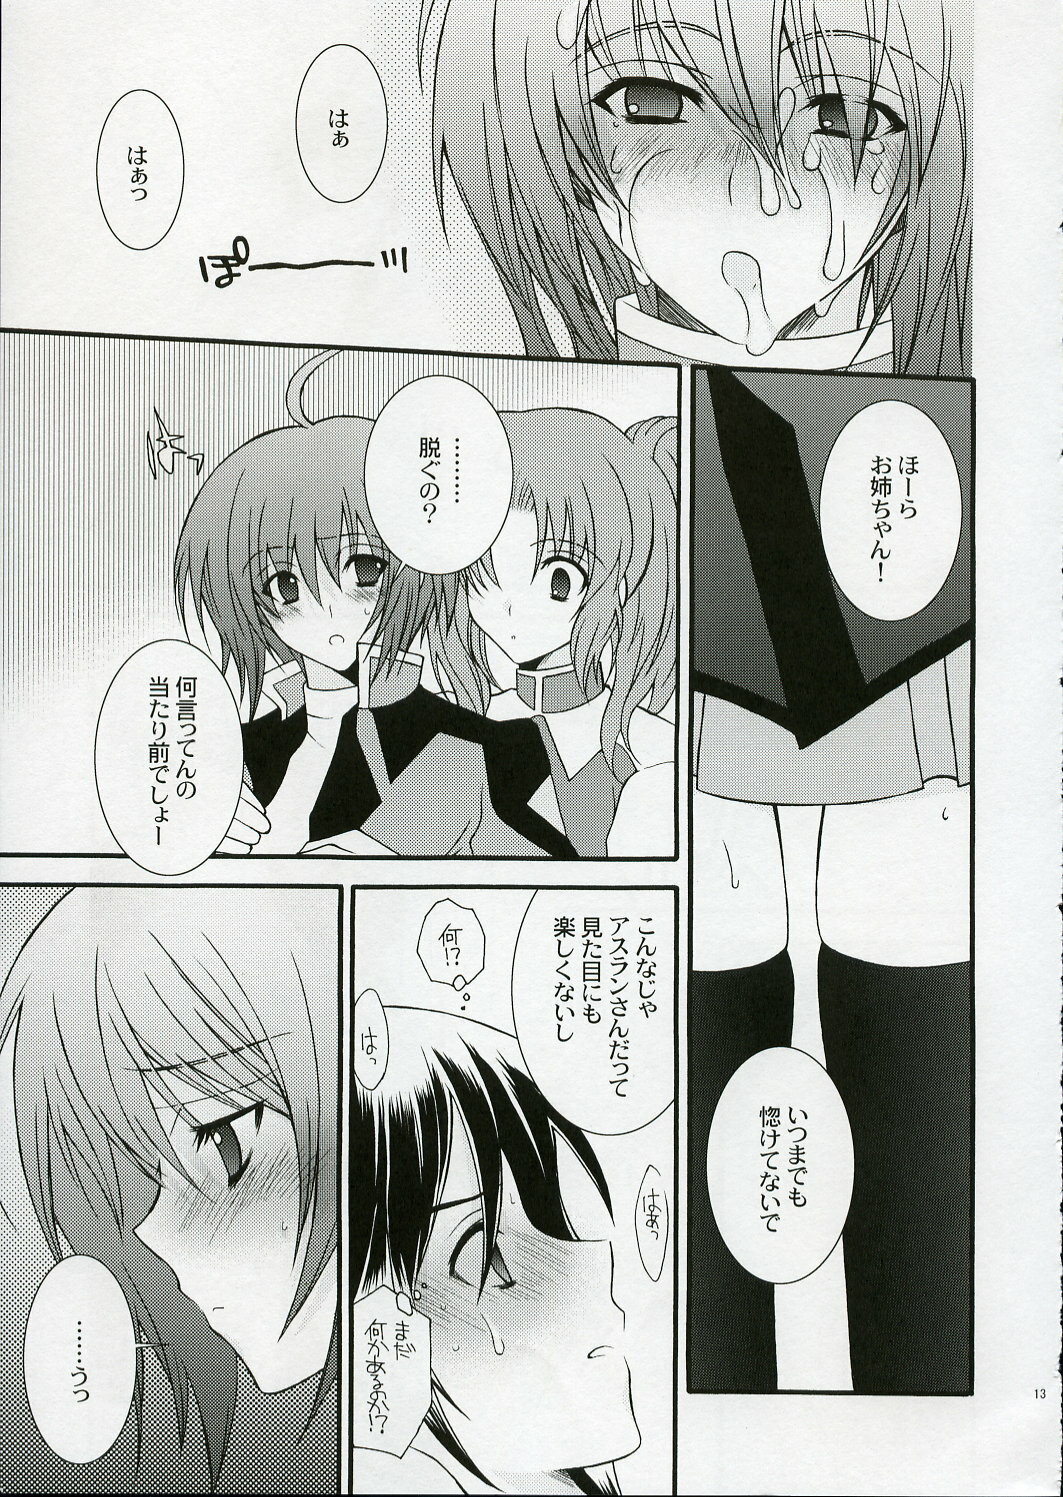 (SC28) [YLANG-YLANG (Ichie Ryouko)] RENDEZ-VOUS (Mobile Suit Gundam SEED DESTINY) page 12 full